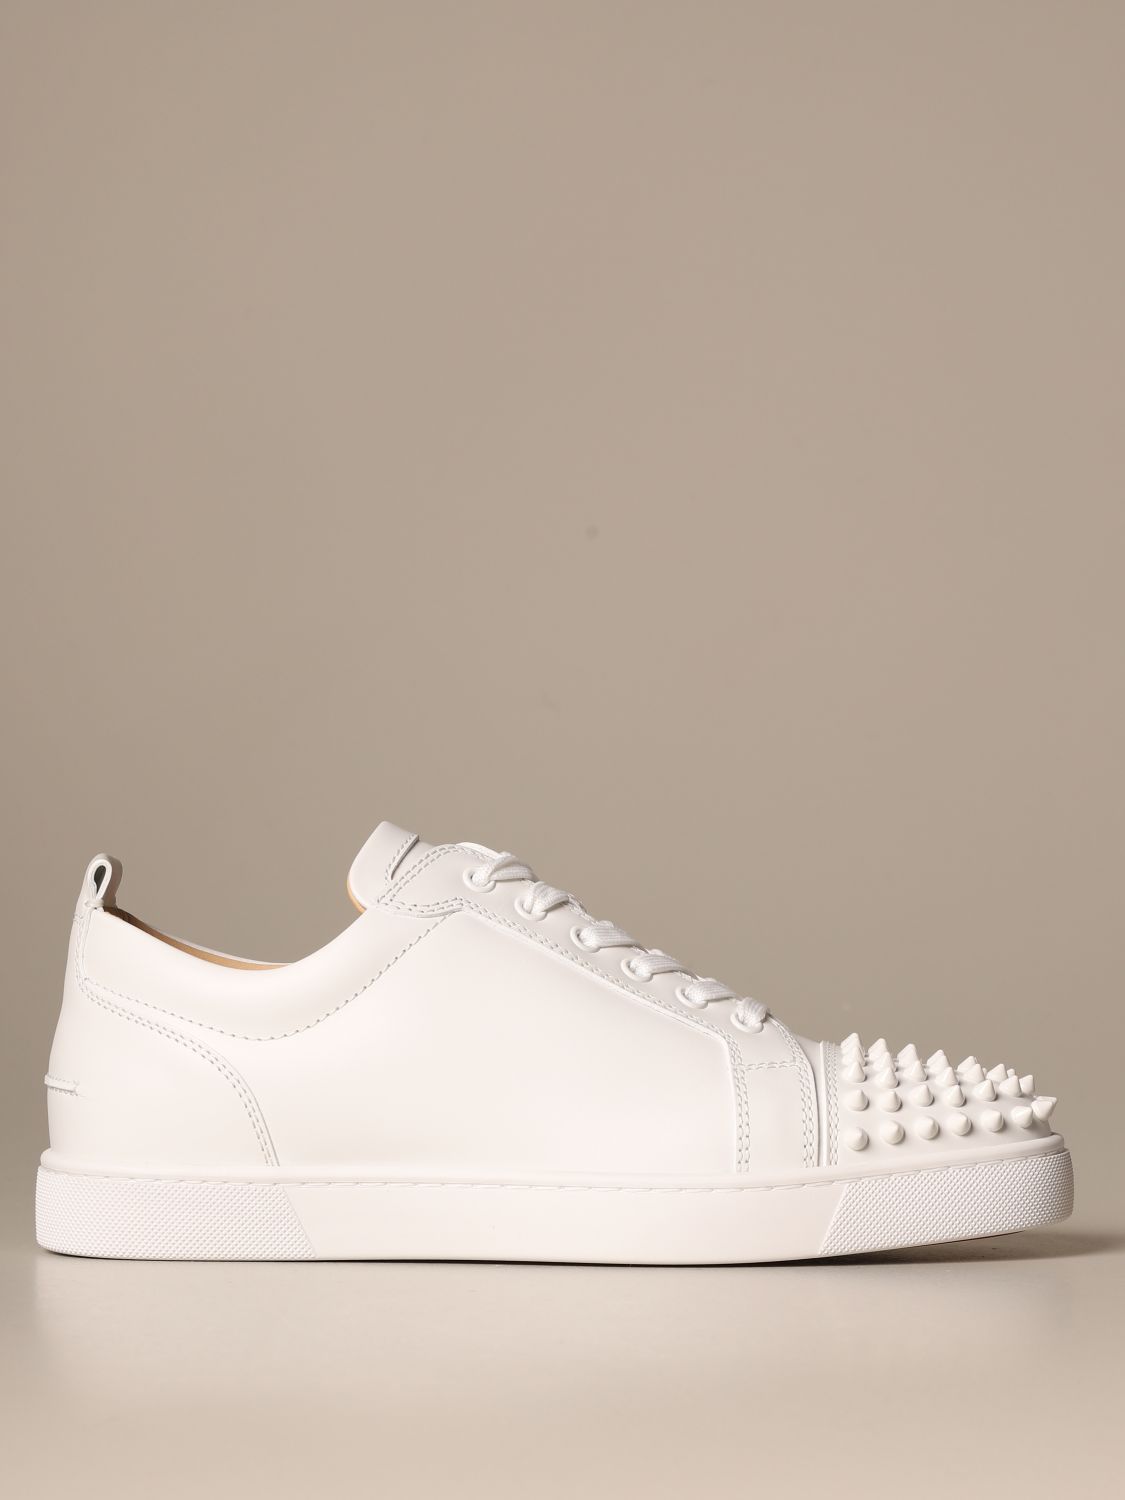 louboutin white studded sneakers